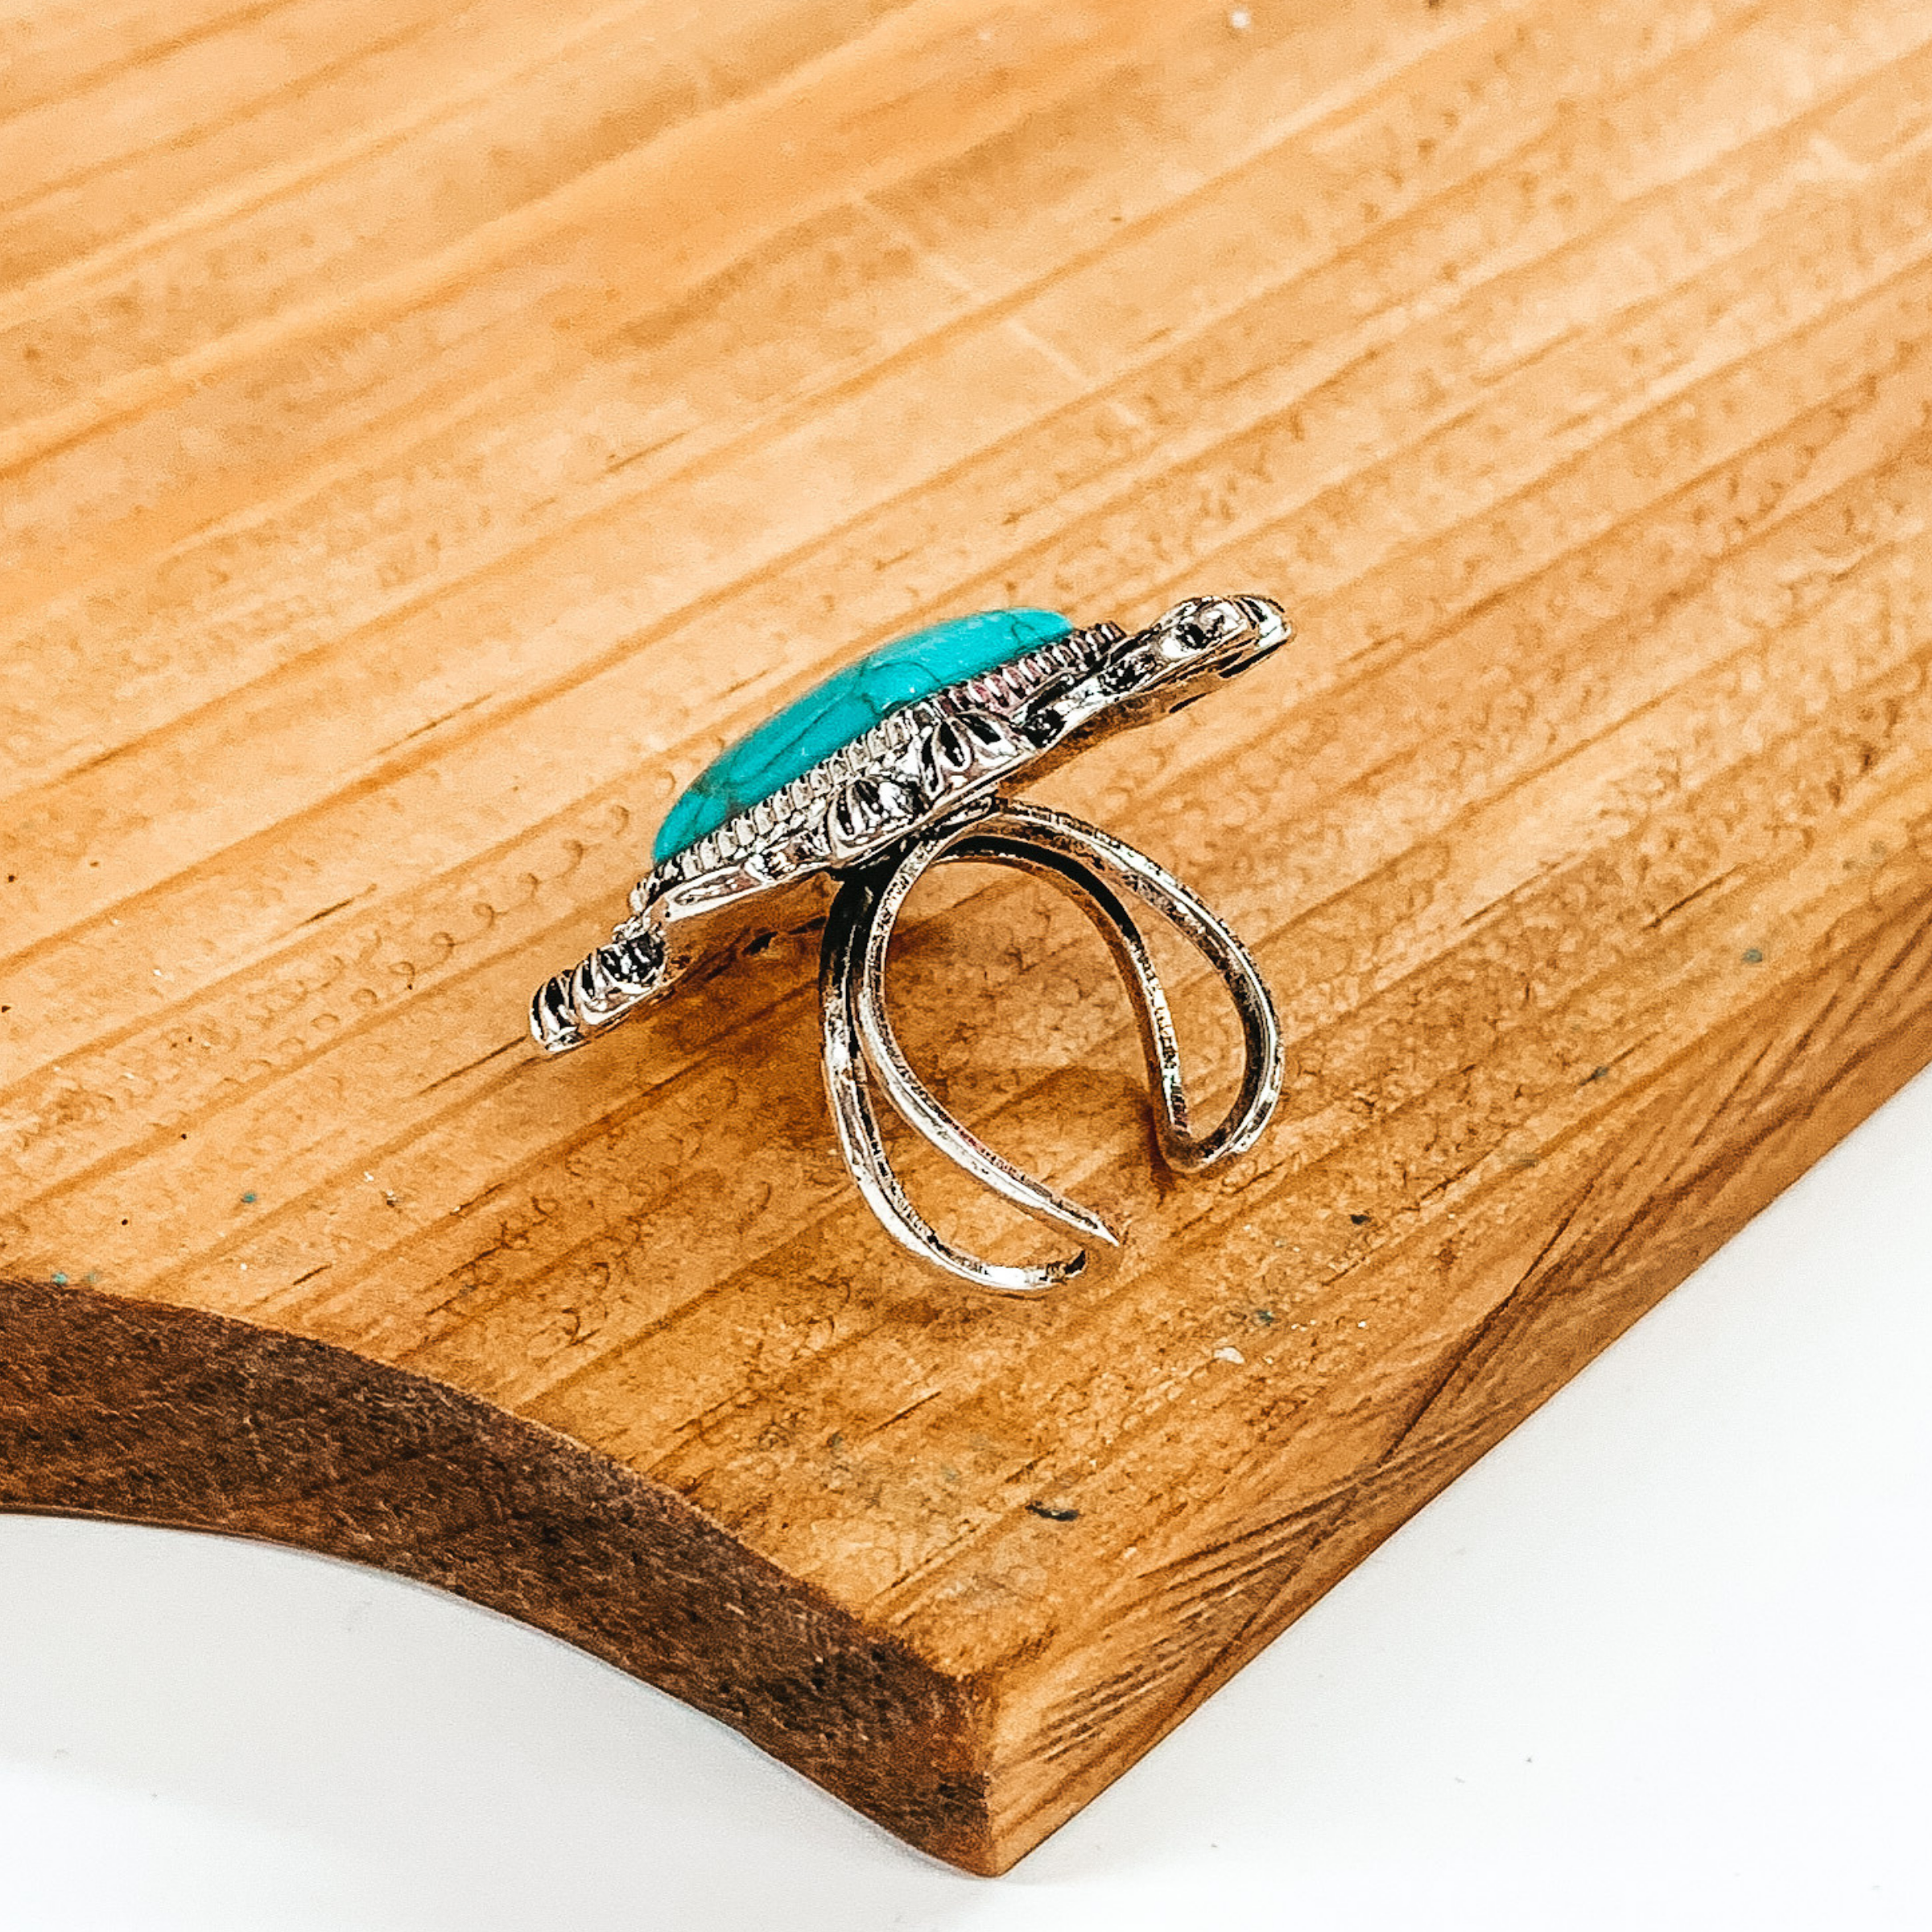 Western Square Stone Silver Tone Cuff Ring in Turquoise - Giddy Up Glamour Boutique